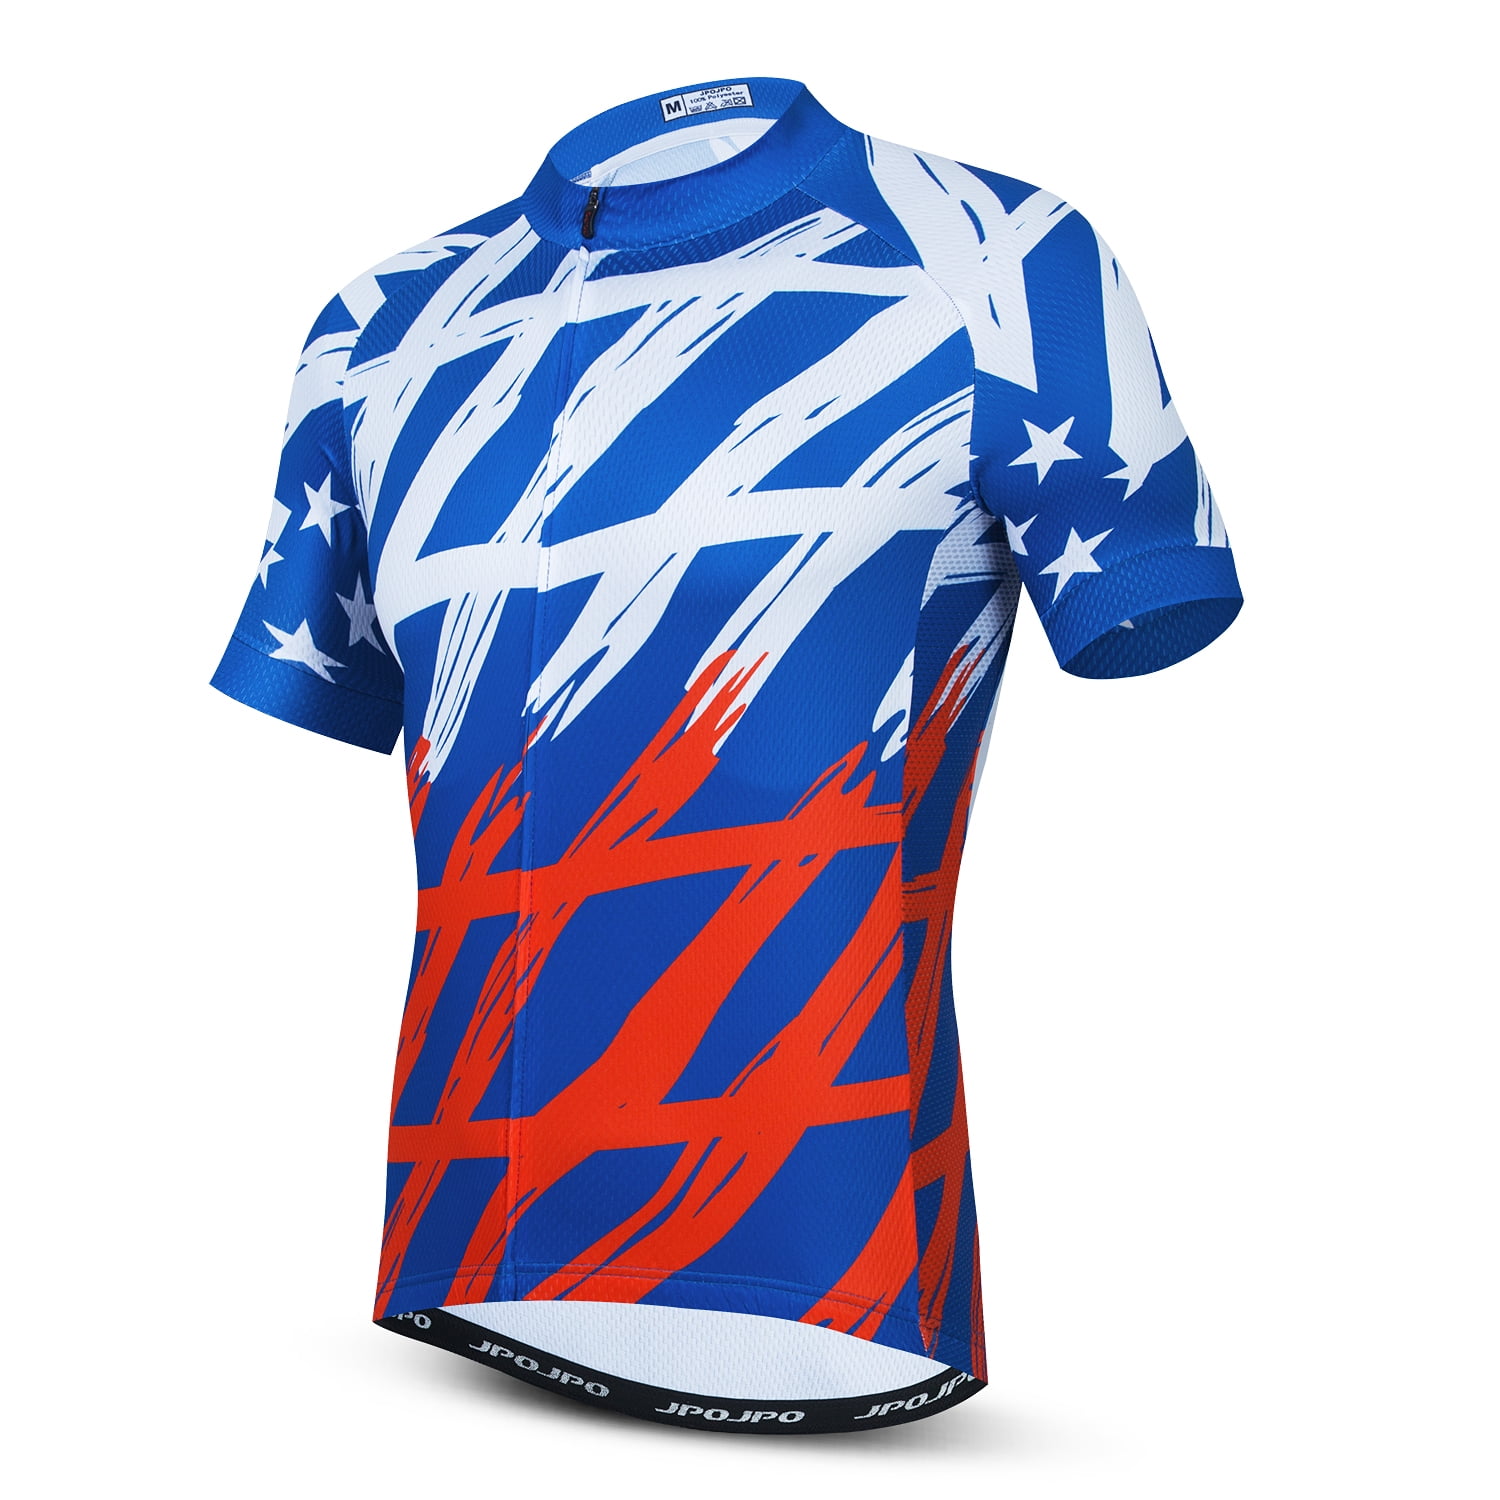 Mens Cycling Jersey,Summer Cycling Shirt for Men,Breathable Anti Sweat Quick Dry Bicycle Clothing Size S-3XL